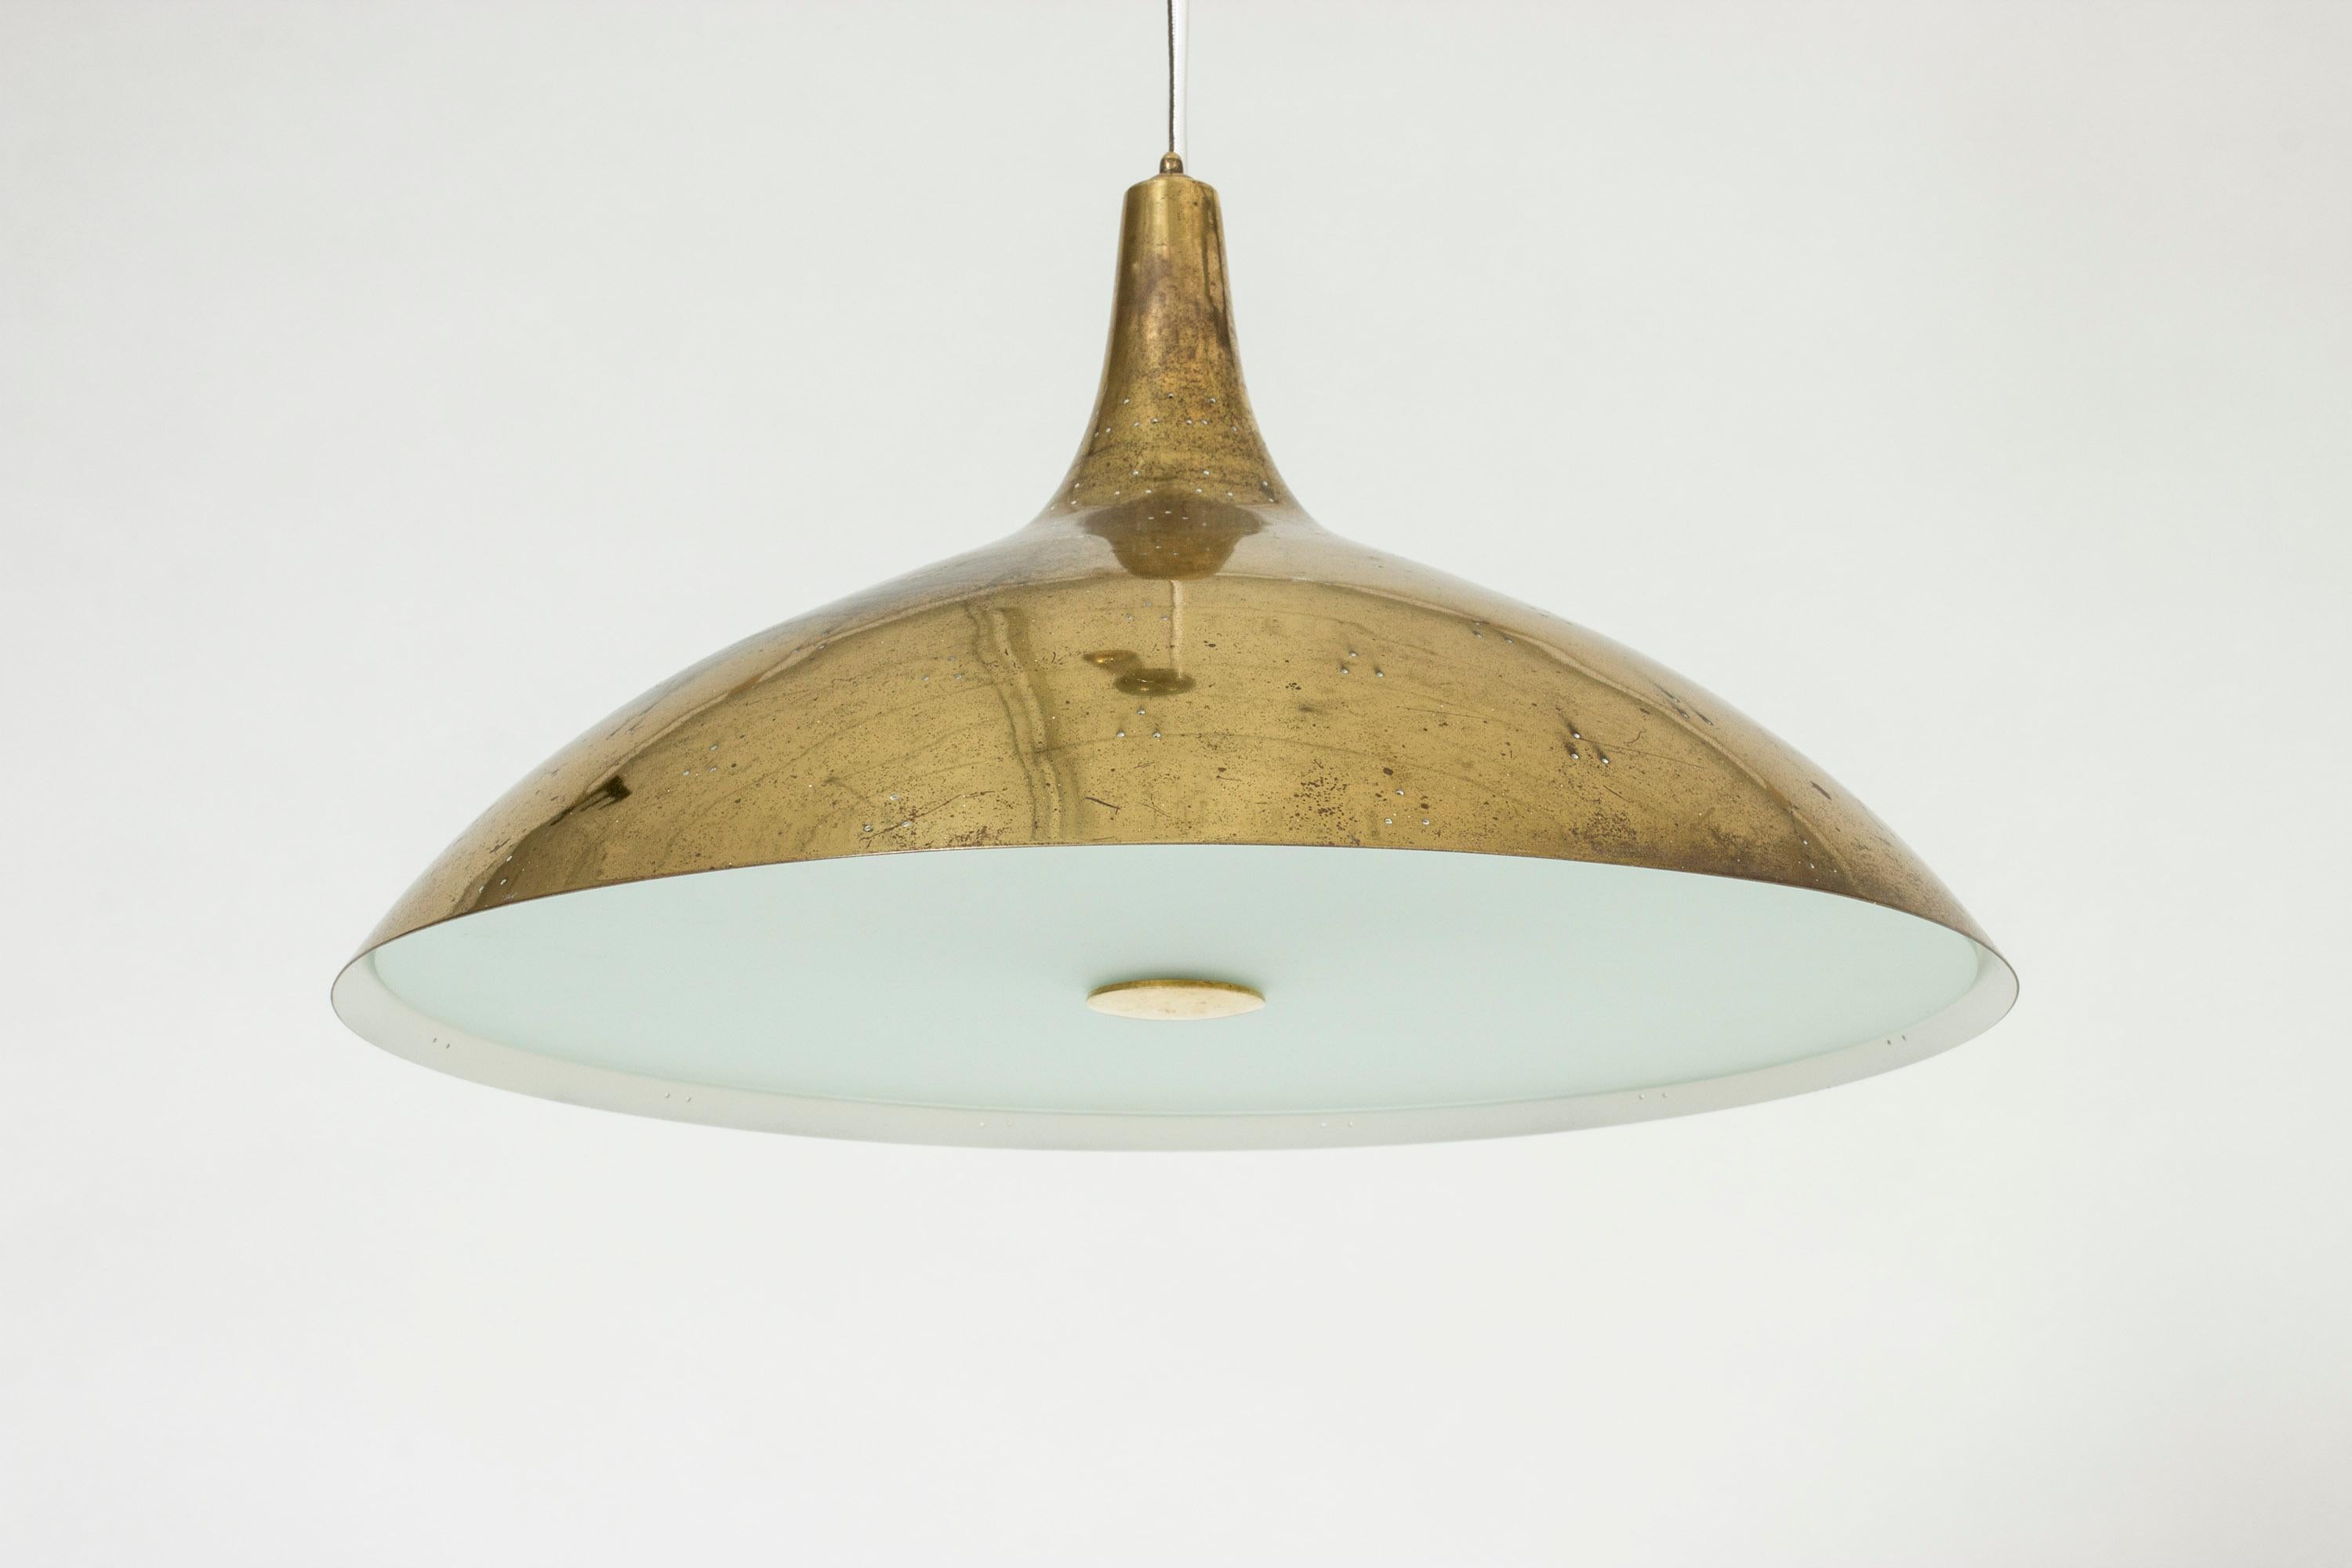 Elegant brass ceiling lamp by Paavo Tynell, with a streamlined shade perforated with small holes. The underside of the lamp has a glass shade that covers the light source. Suspended with a brass cord, height adjustable with a brass